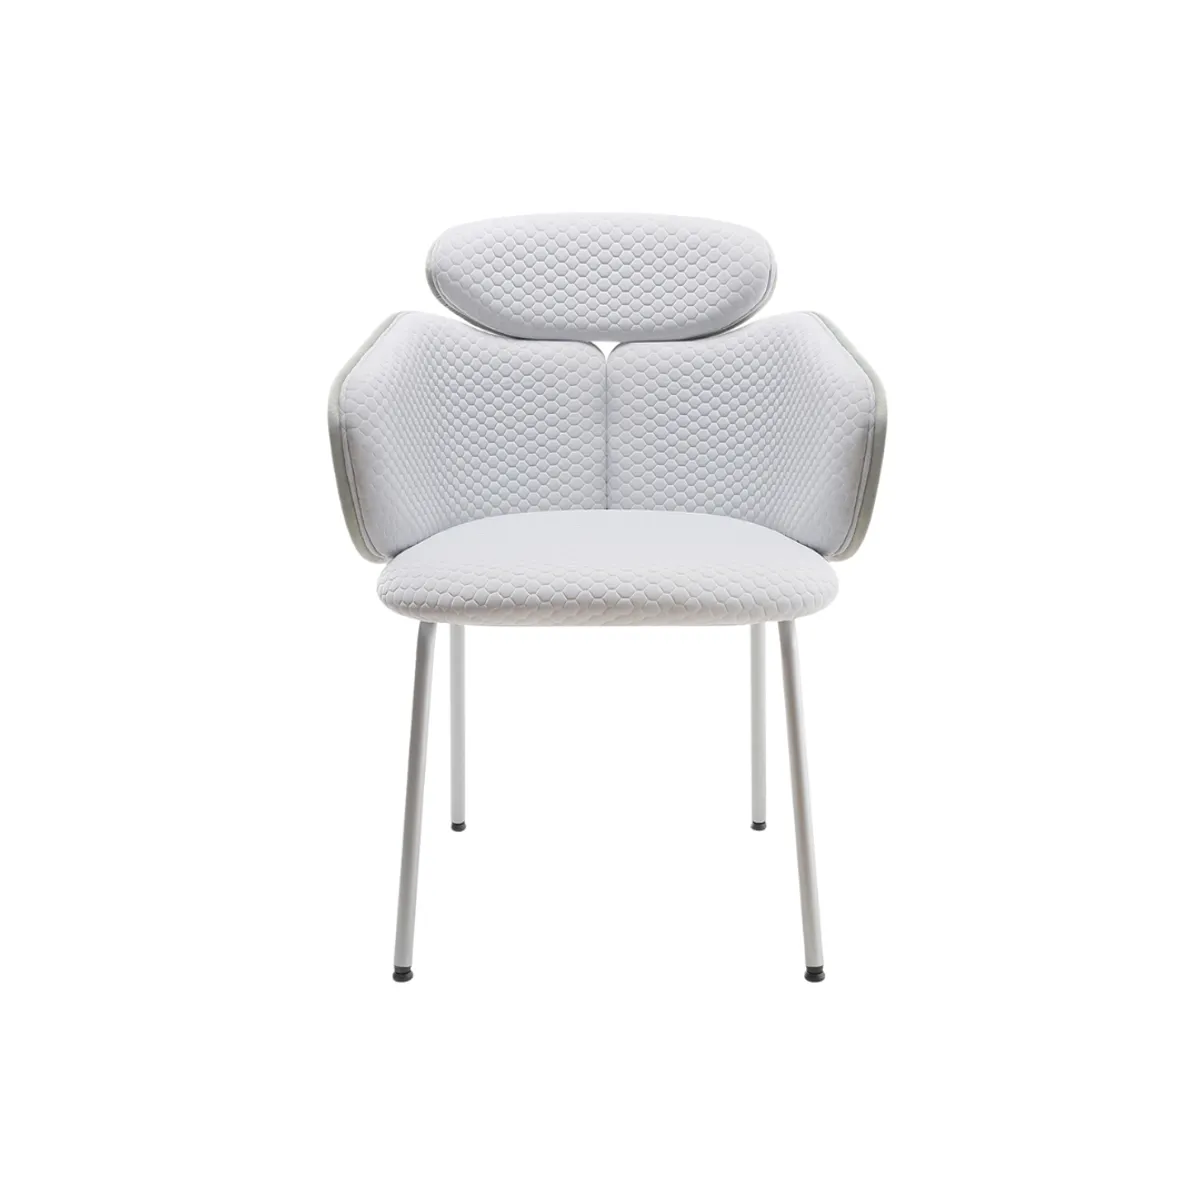 Russo armchair 2